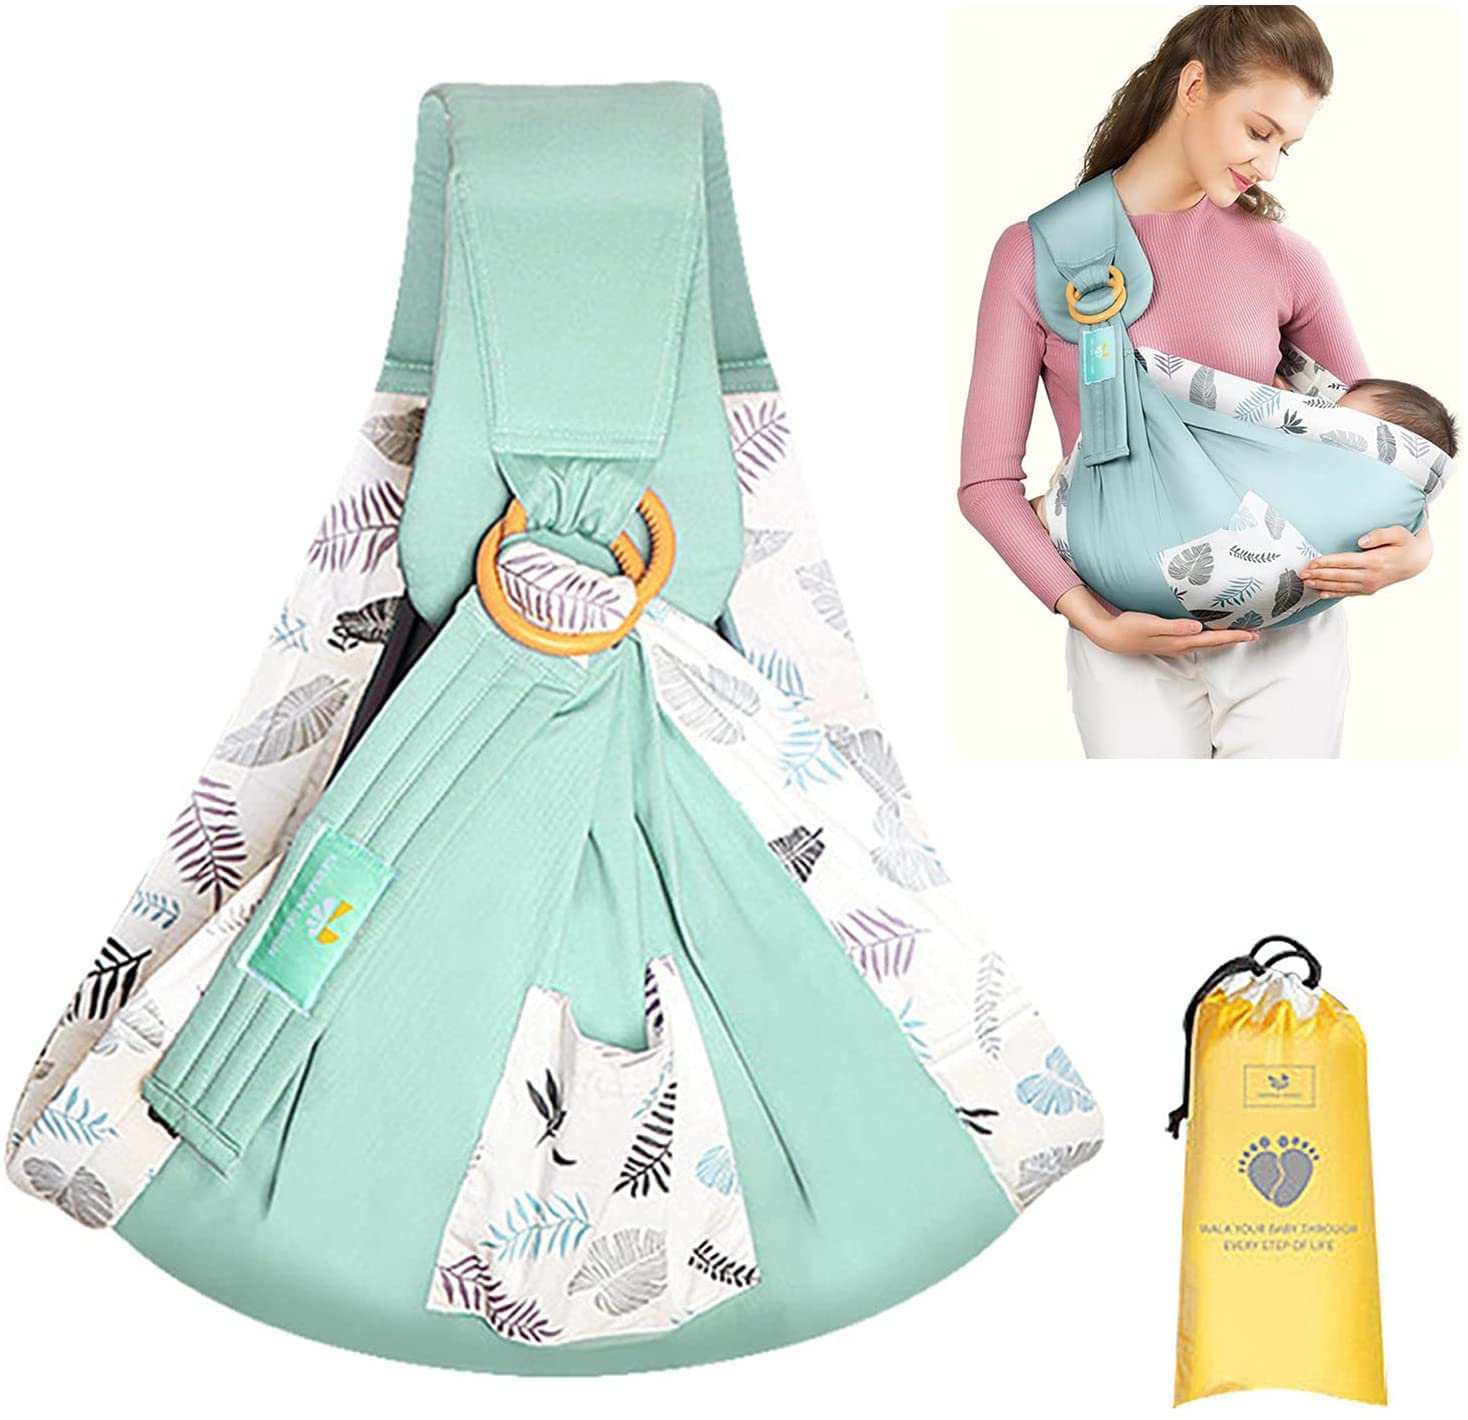 cakefly Leaf Pattern Baby Carrier, All-in-1 Baby Carrier for Newborns, Hands-Free Carrying, Breastfeeding Cover, Adjustable with Sturdy Rings, for Newborn up to 35 lbs